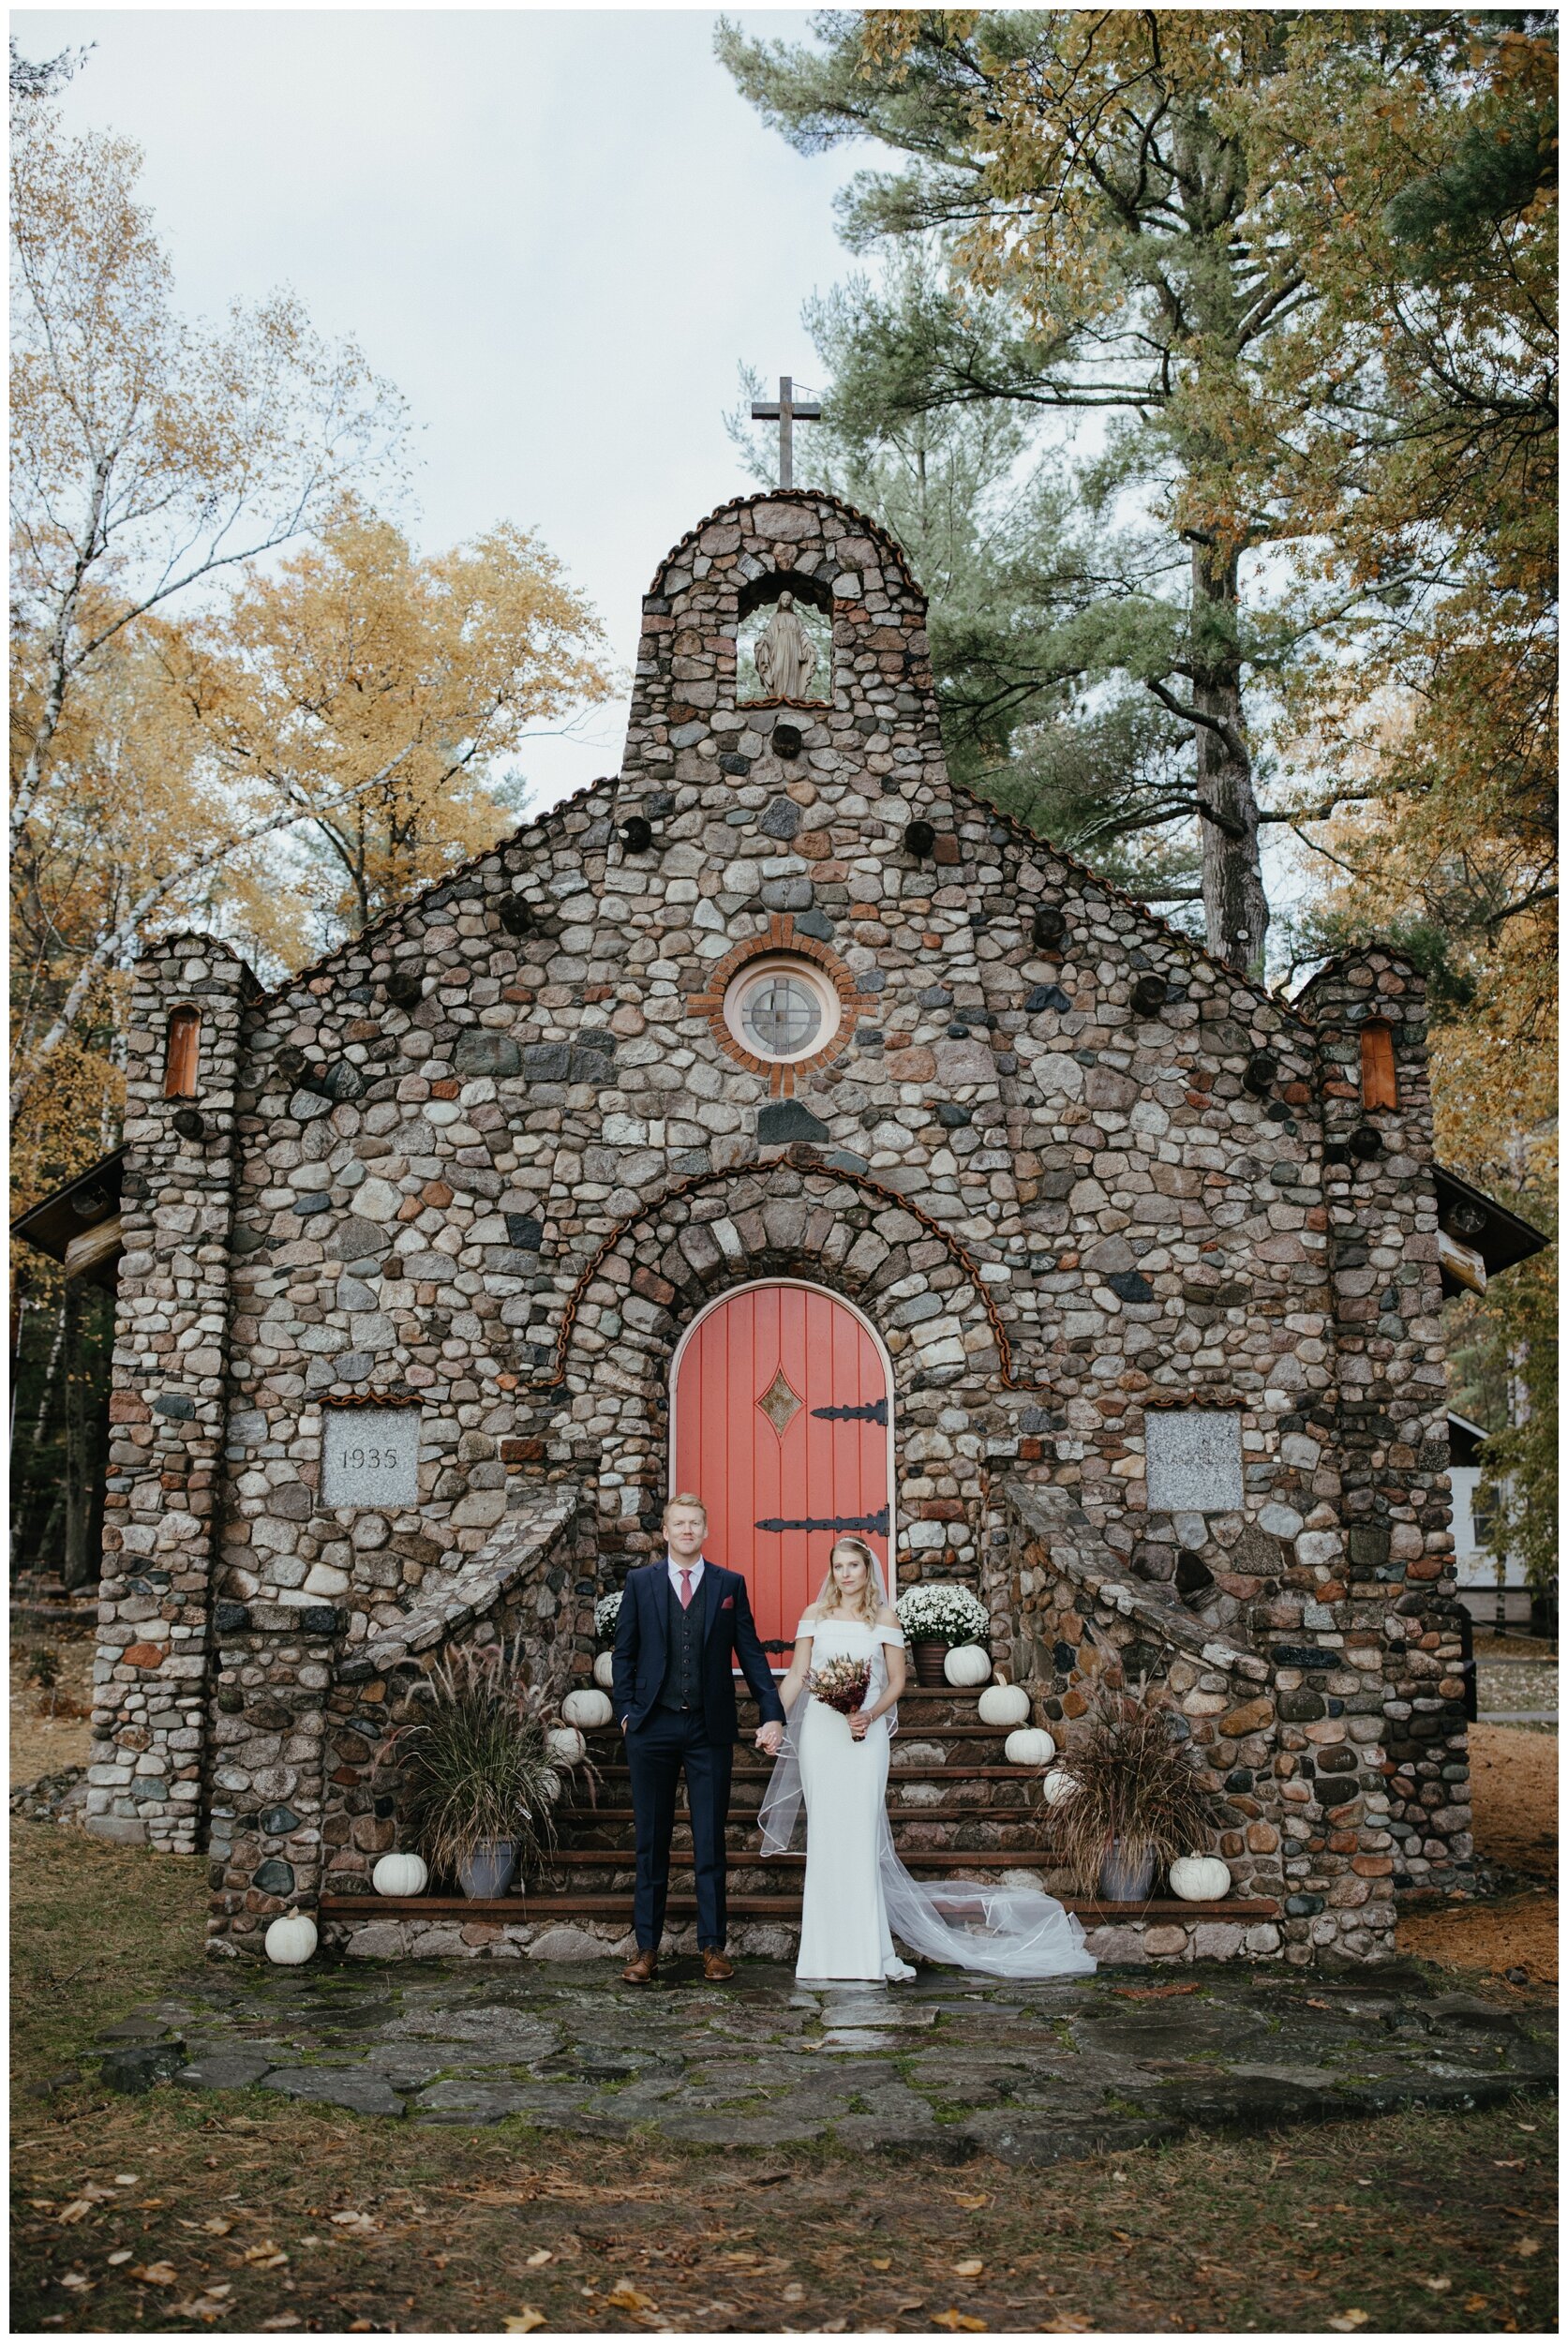 Bride and groom standing in front of chapel in the woods at fall wedding on Crosslake, Minnesota